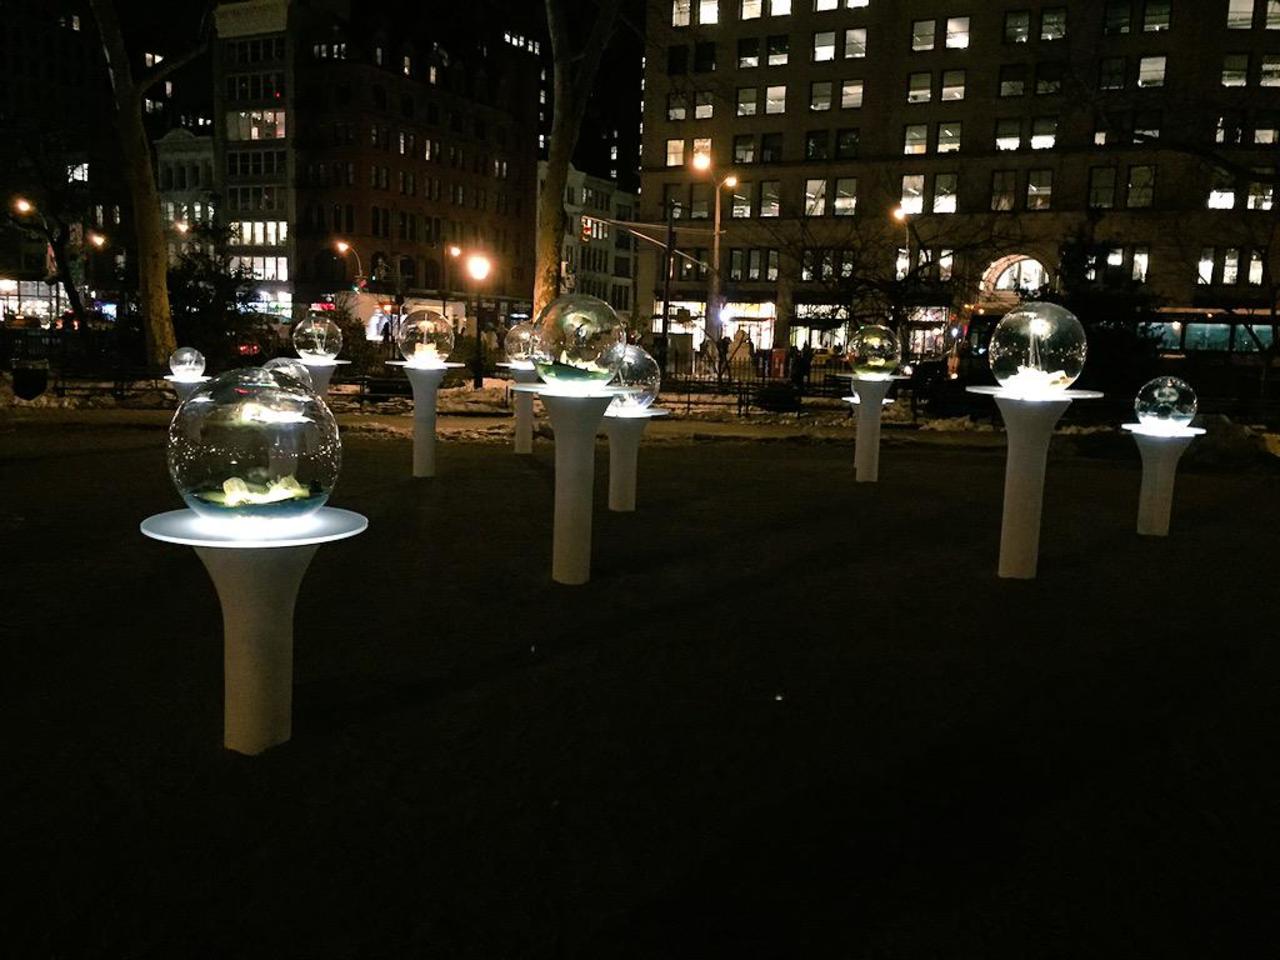 Awesome installation in @MadSqParkNYC #nycart #art http://t.co/ZlkYhJepAD